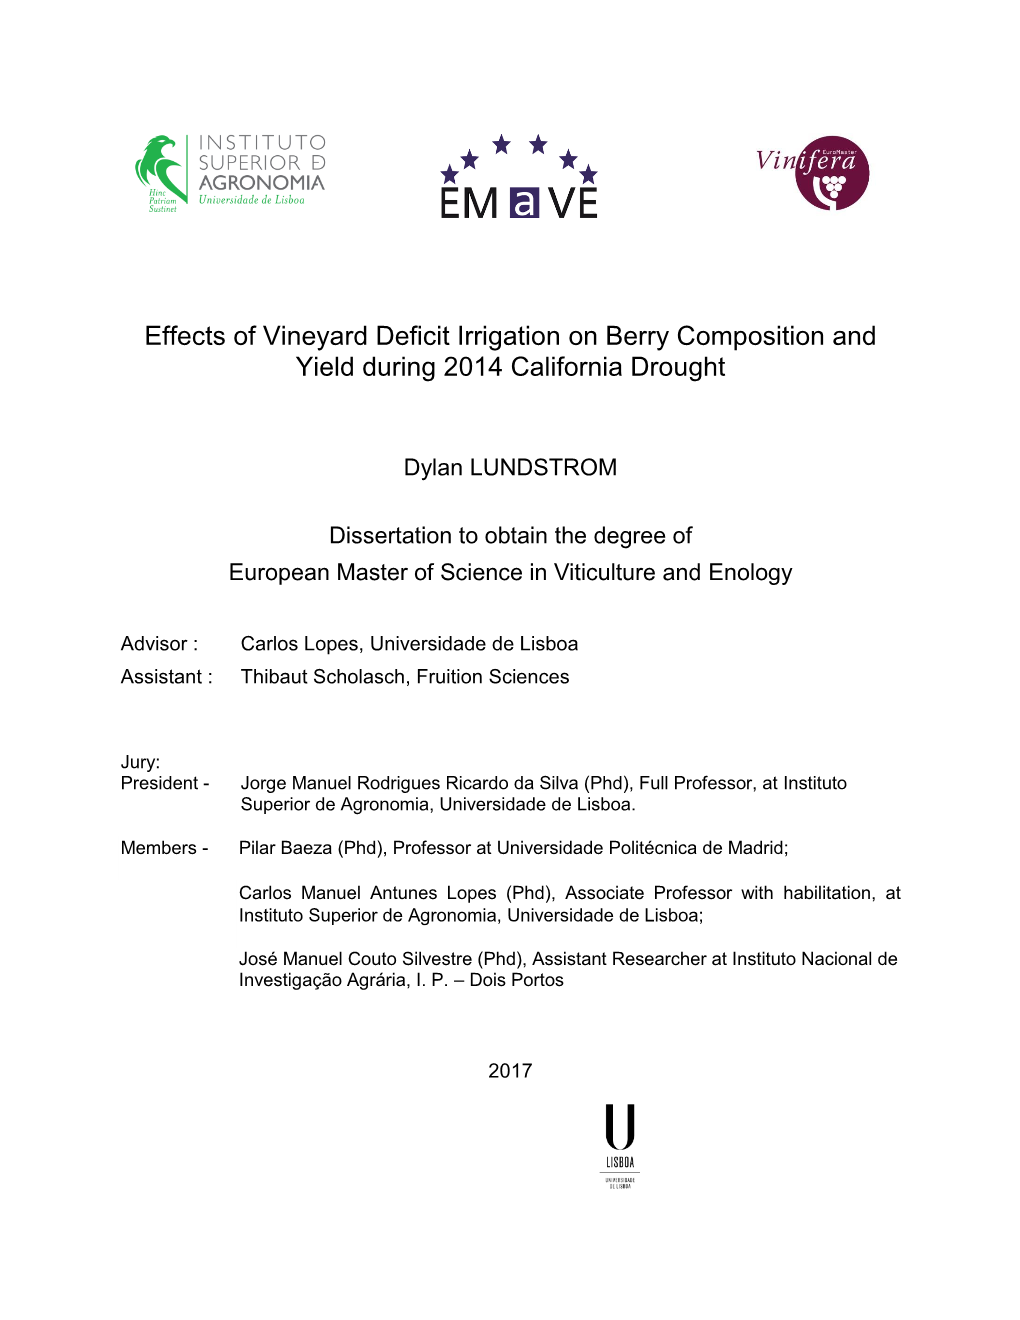 Effects of Vineyard Deficit Irrigation on Berry Composition and Yield During 2014 California Drought